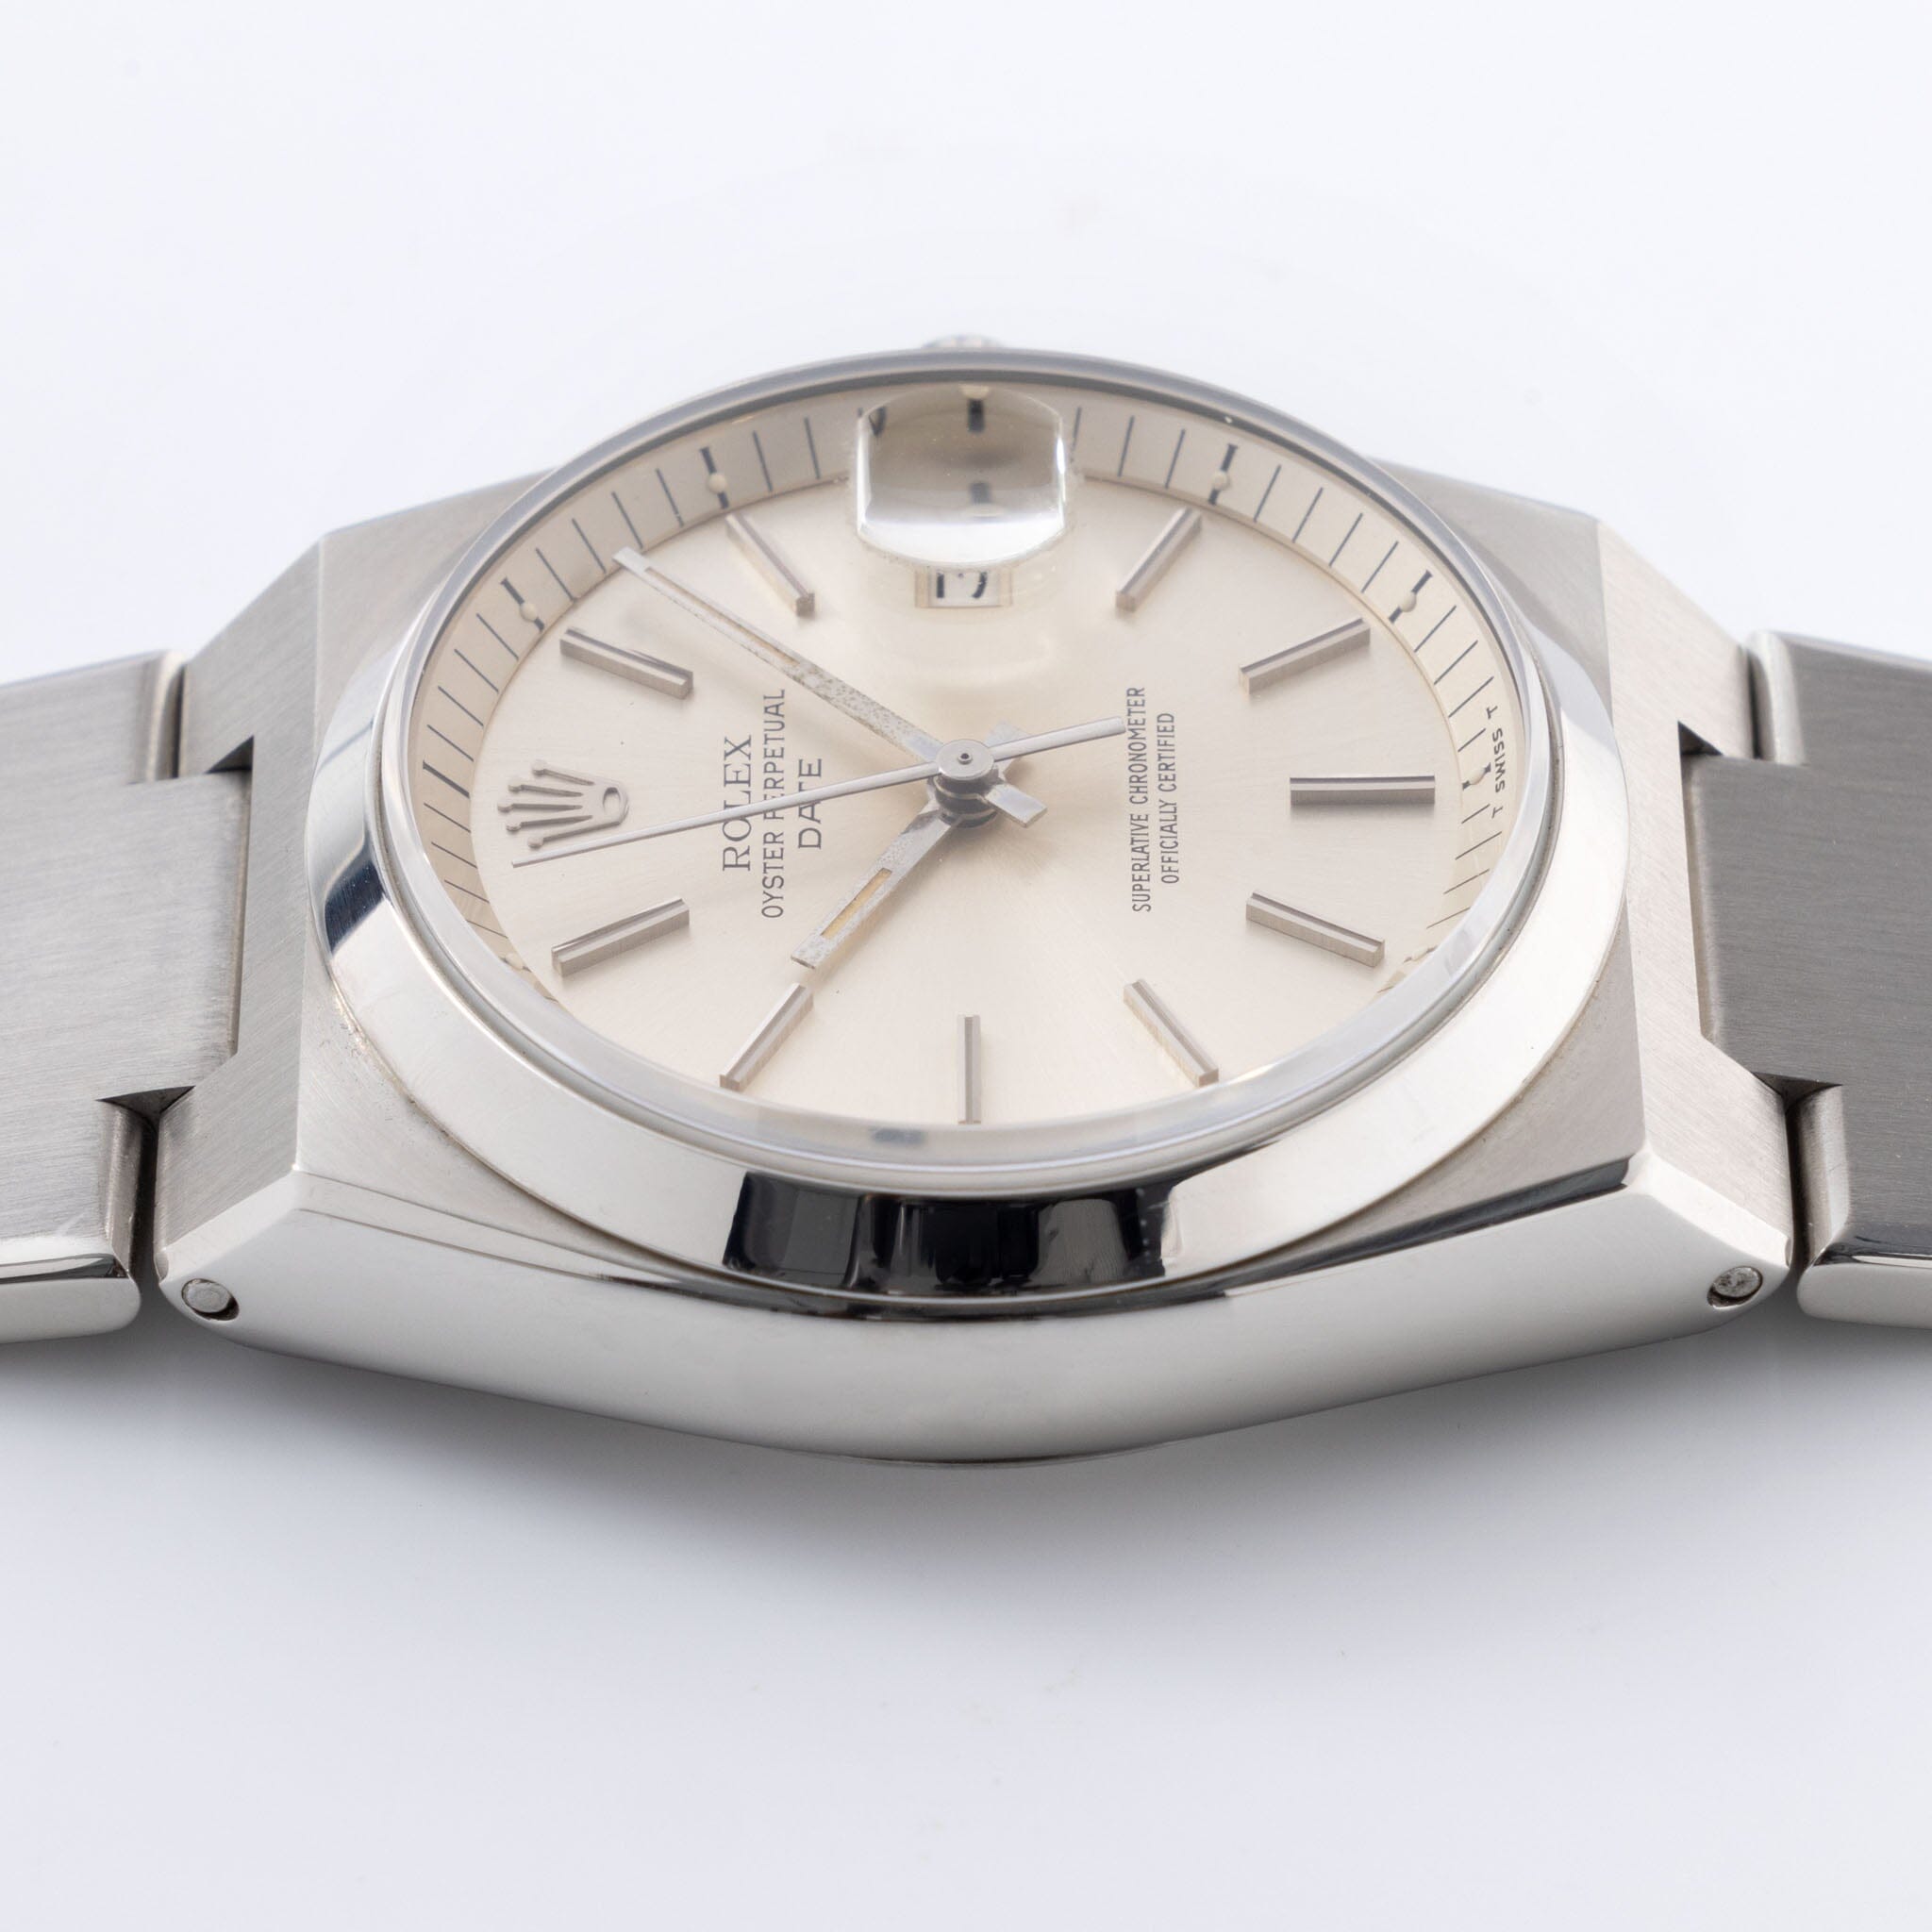 Rolex Oyster Perpetual Date Silver Dial Ref 1530